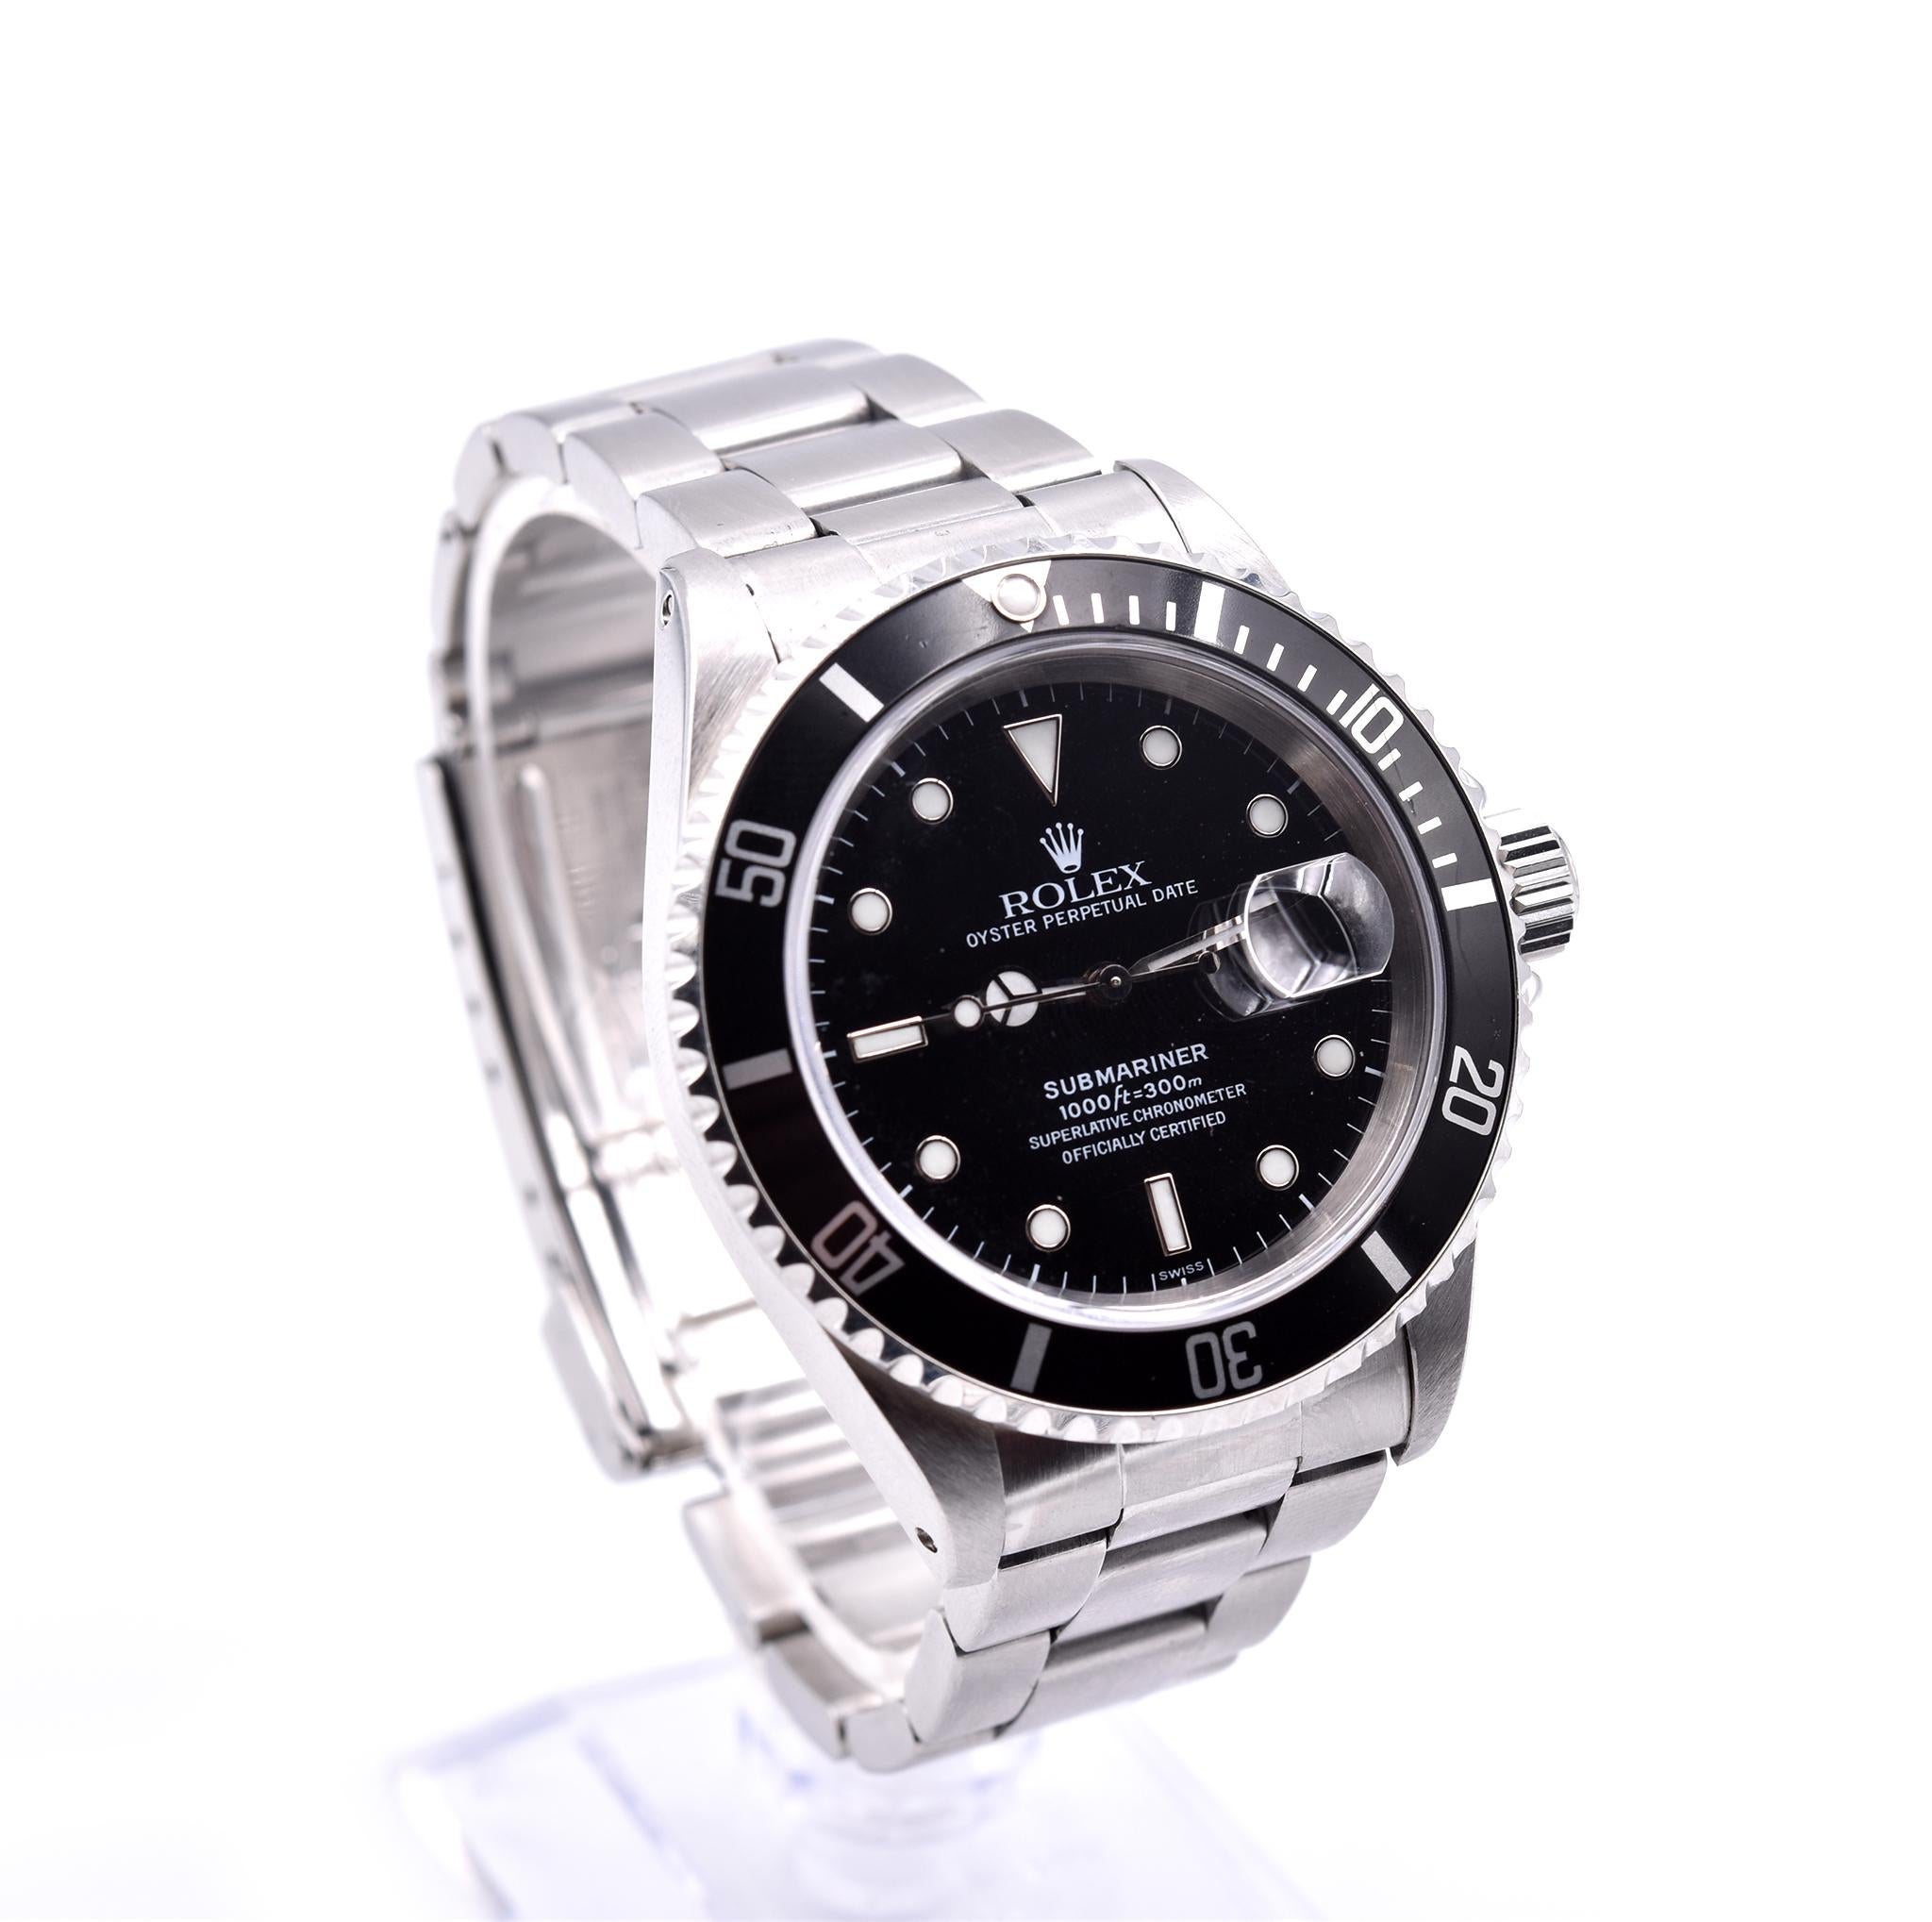 Movement: automatic
Function: hours, minutes, seconds, date
Case: round 40mm stainless steel case, stainless steel black uni-directional dive bezel, screw-down crown, scratch resistant sapphire crystal, waterproof to 300 meters
Band: stainless steel